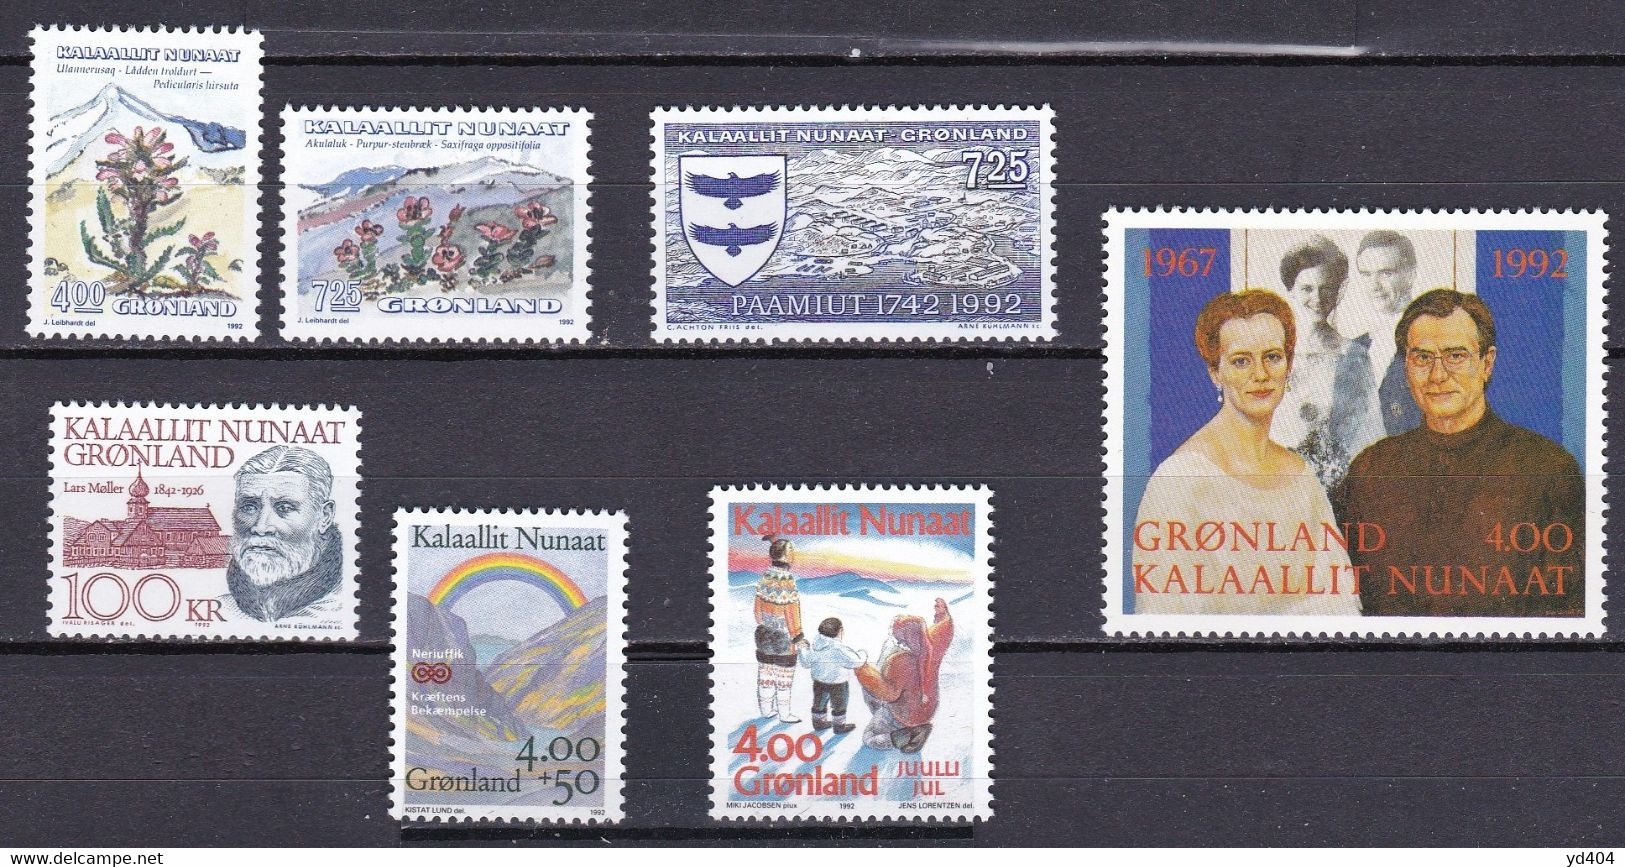 GL145 - GREENLAND – 1992 – FULL YEAR SET – Y&T # 211/7 MNH 61,50 € - Années Complètes